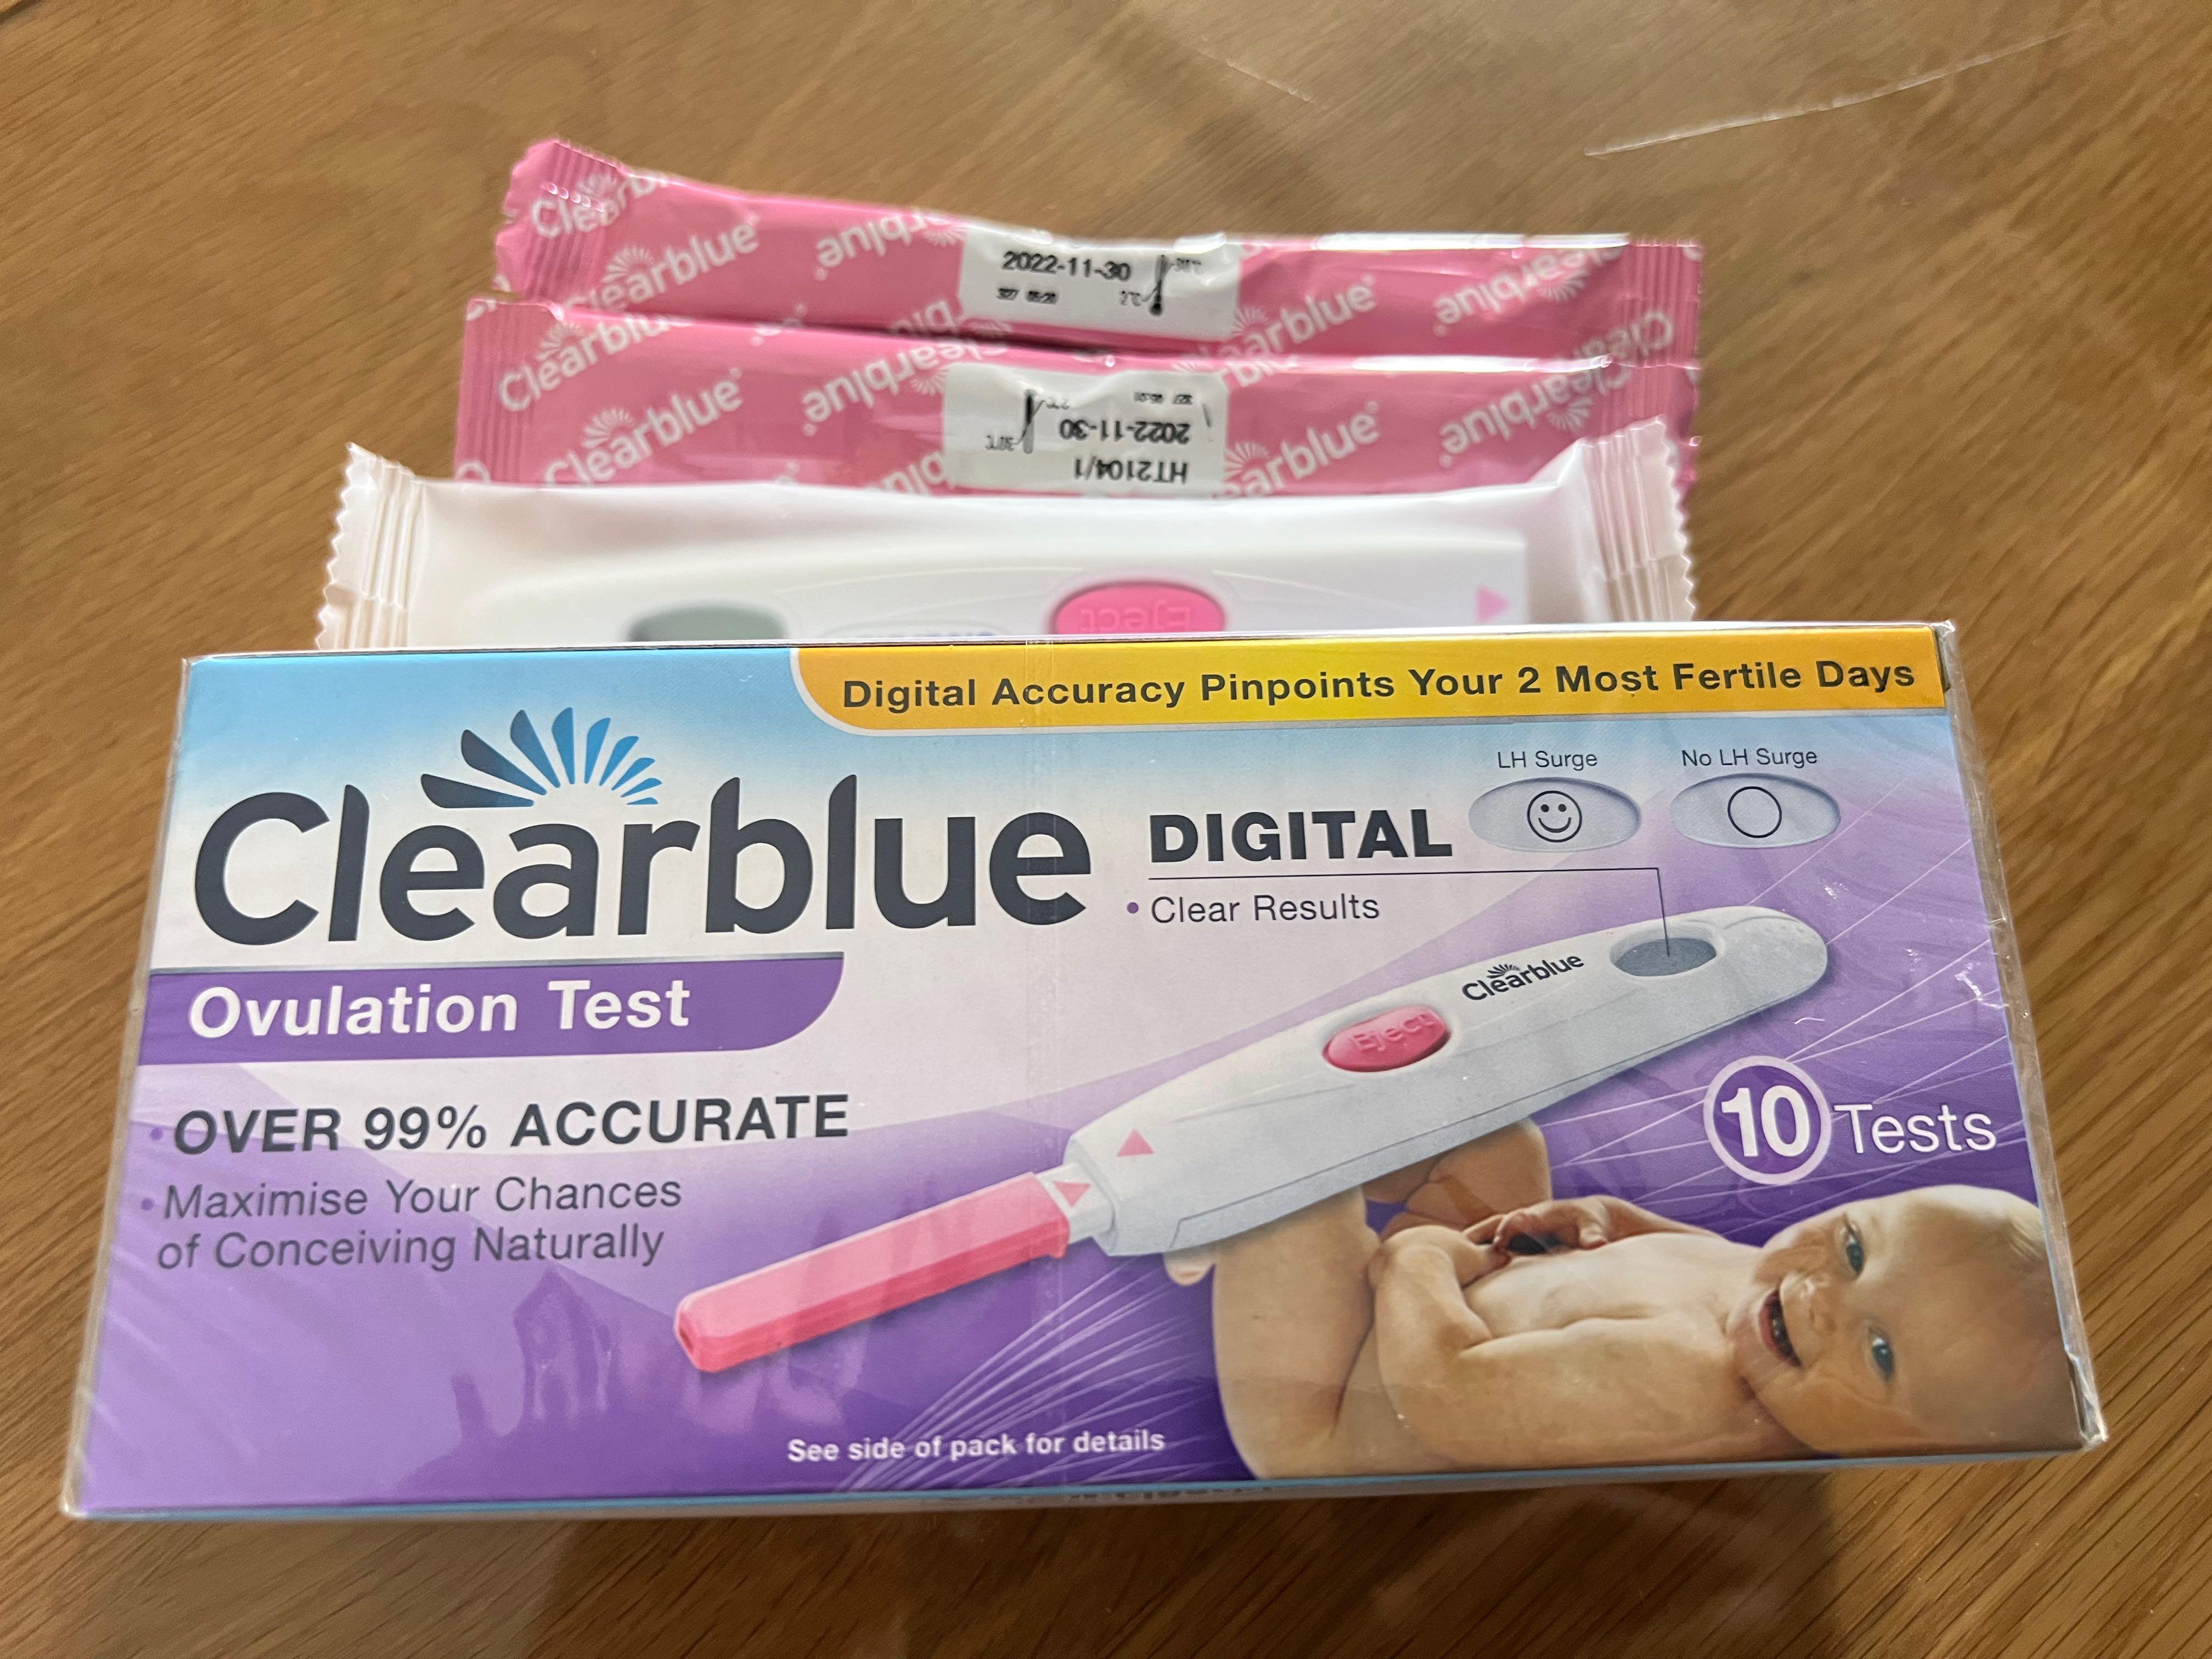 Ovulation Tests: Digital Tests, Sticks and Kits – Clearblue